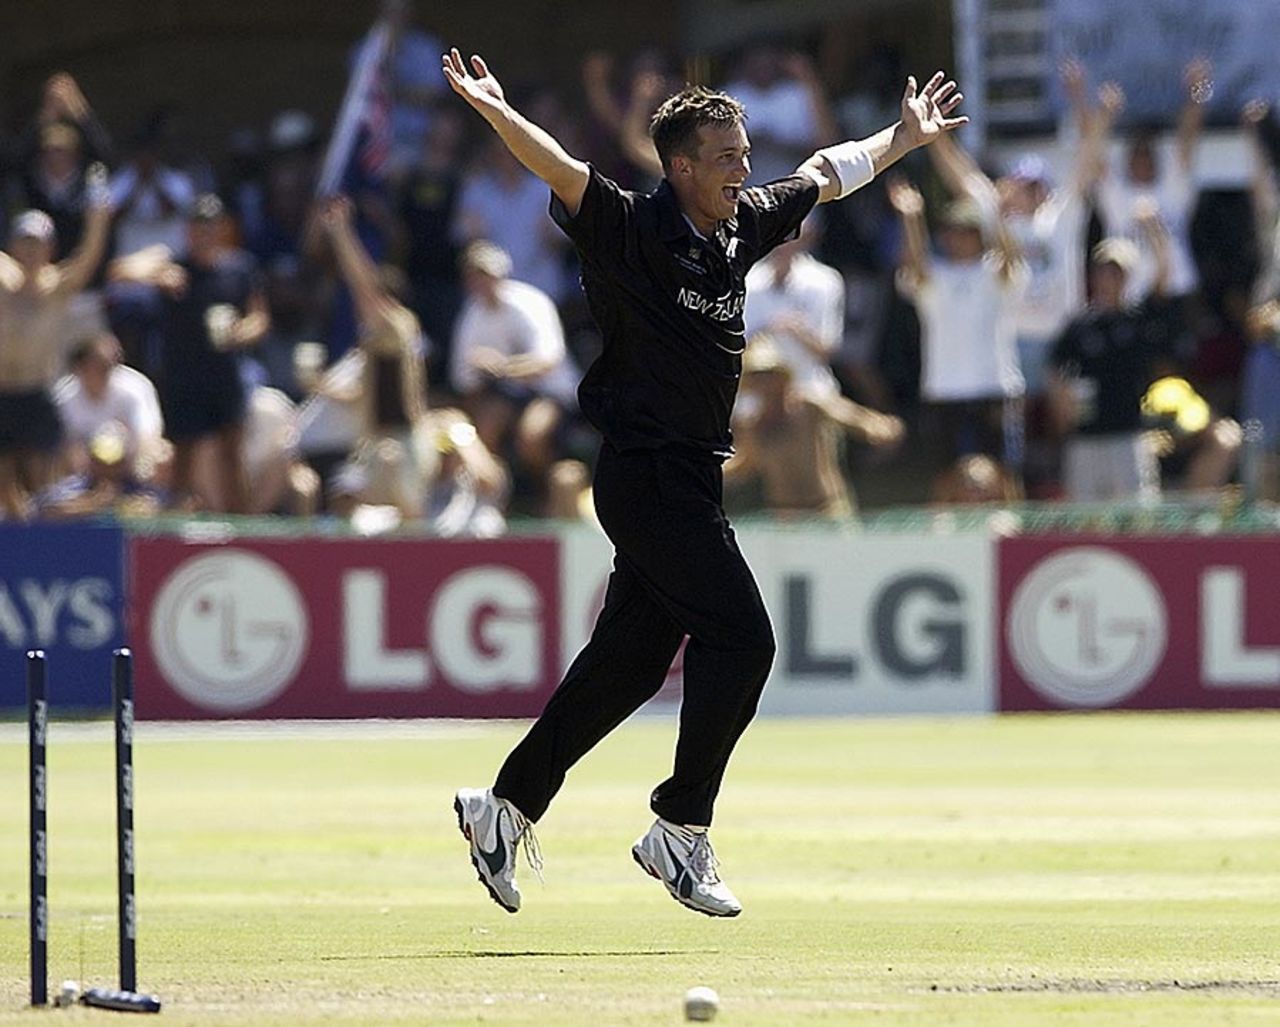 Shane Bond ripped through Australia and finished with 6 for 23, New Zealand v Australia, 5th Super Six match, Port Elizabeth, March 11, 2003